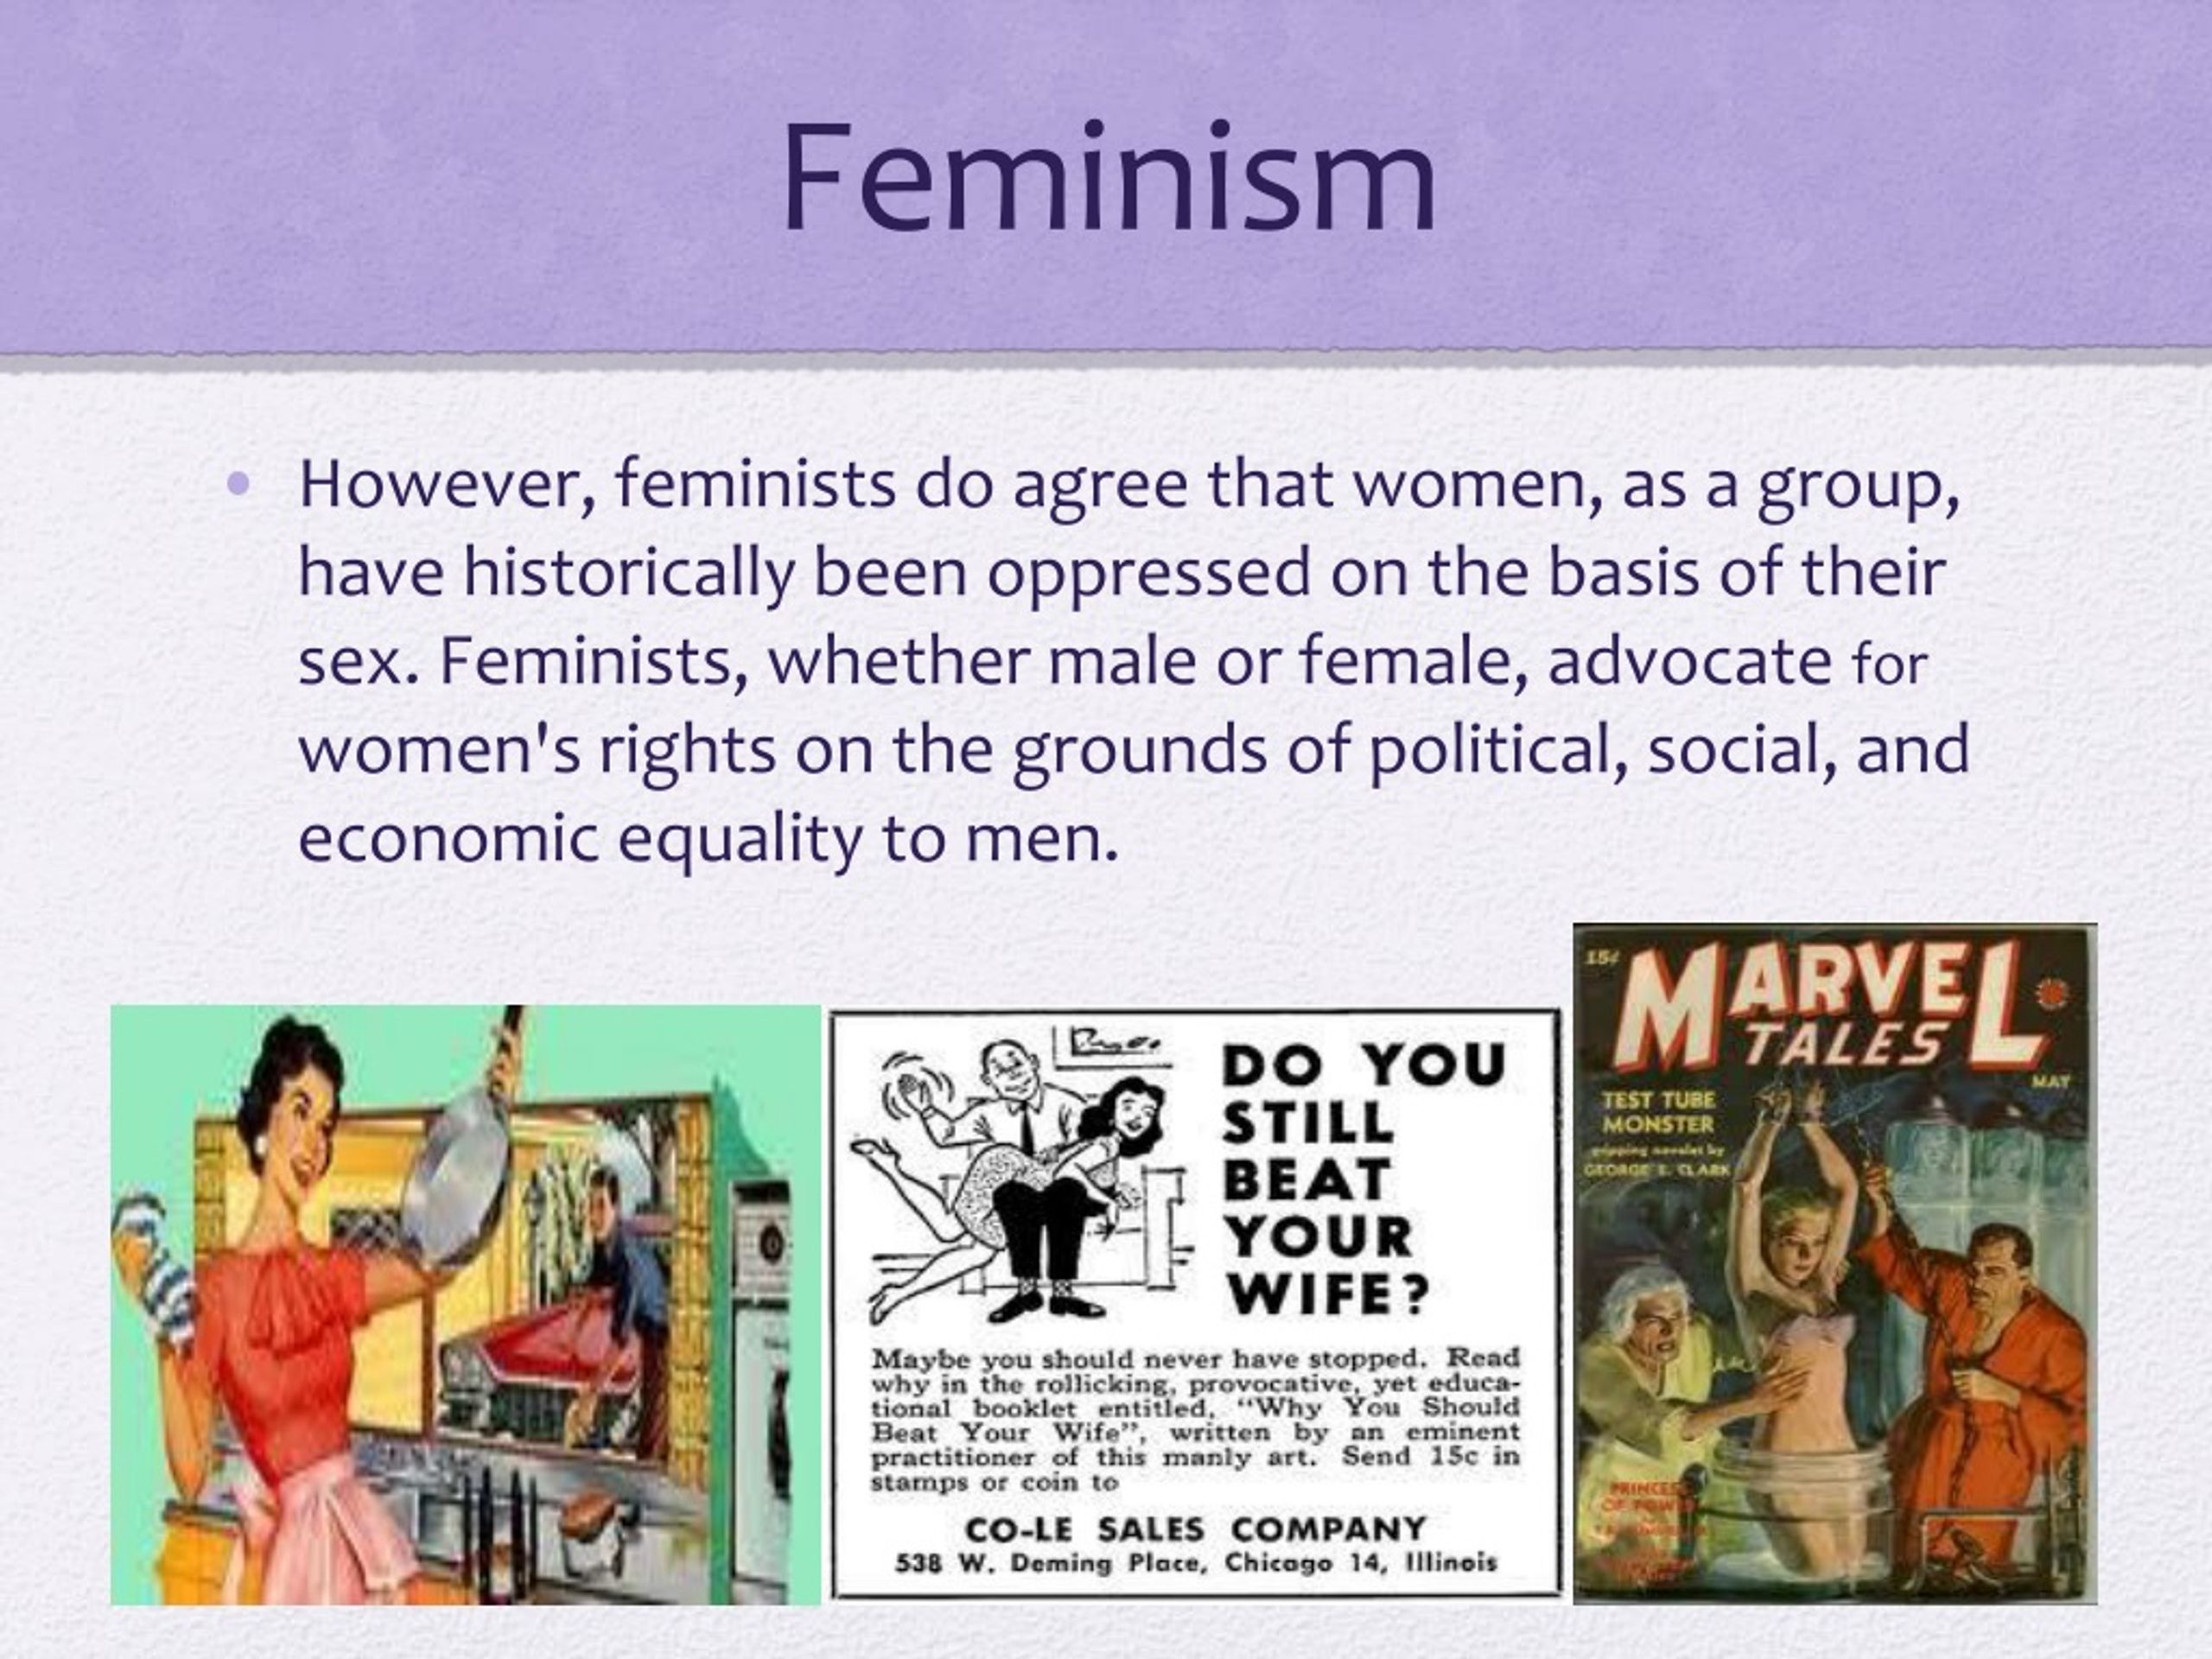 Feminist Literary Theory. POWERPOINT feminism. Feminism Art Theory. Feminist Cinema Theory. Do you agree with me